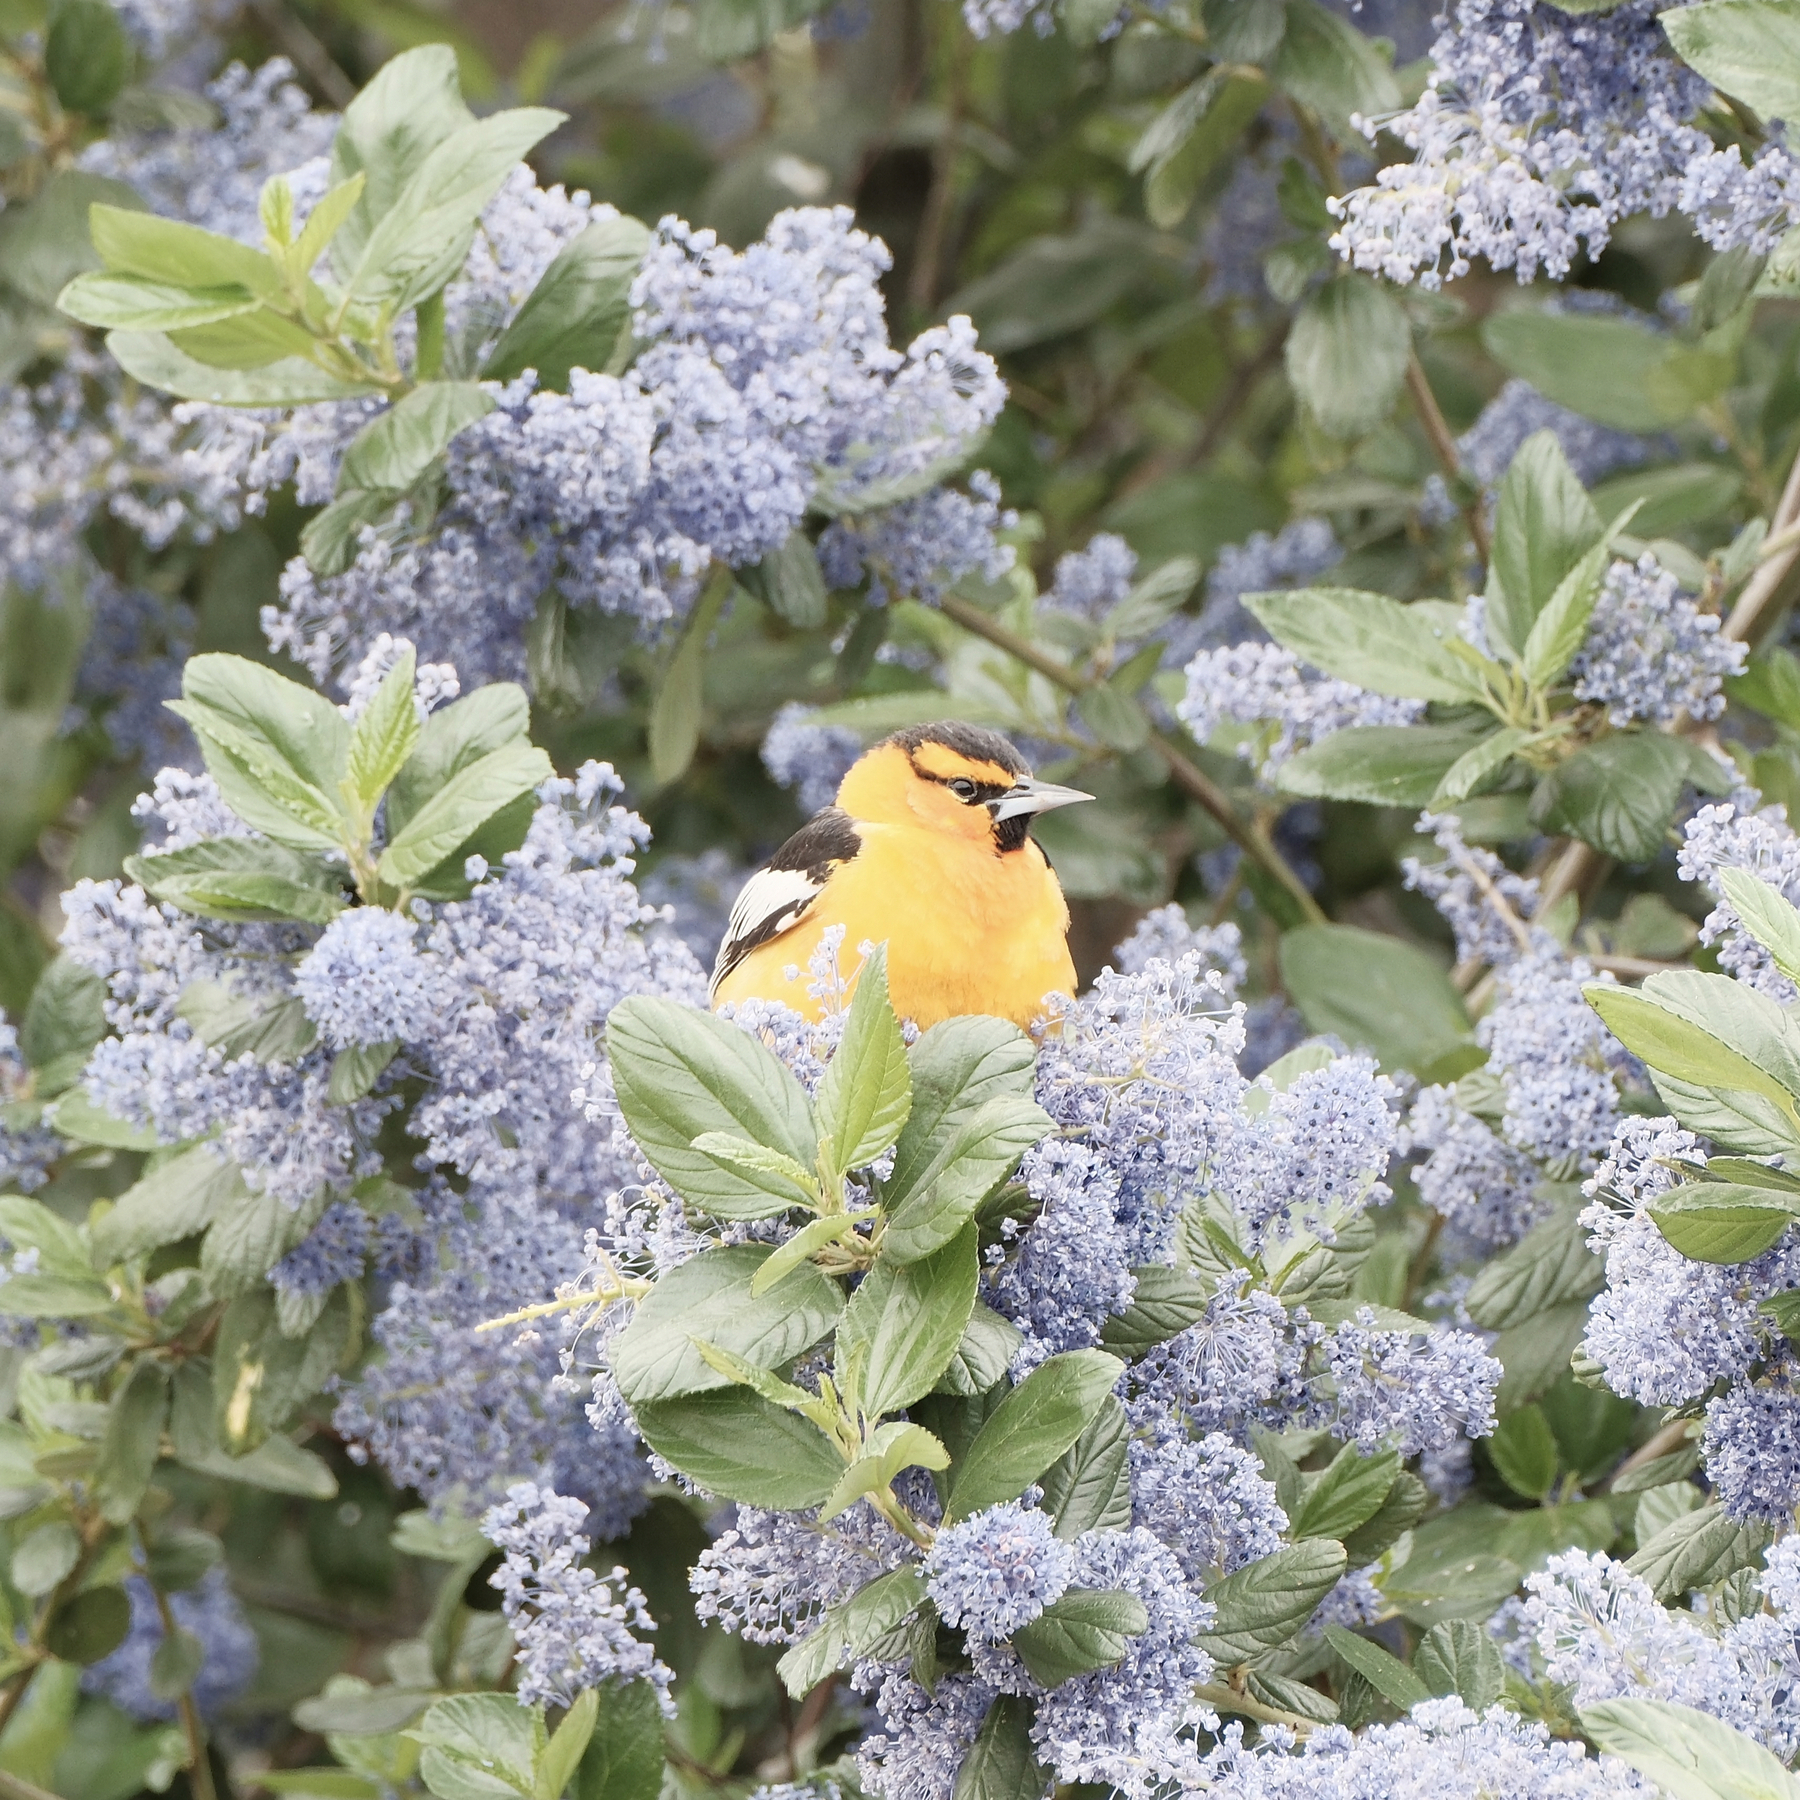 A medium Bullock’s Oriole bird with a bright orange chest, a reddish throat, and a black chin. It has a black back with whitish wings. Its orange head has a black stripe on top and a black stripe going from the rear corner of its eye to its back. The bird is perched in a Ceanothus shrub that’s loaded with tiny violet flowers and dark green leaves in between.